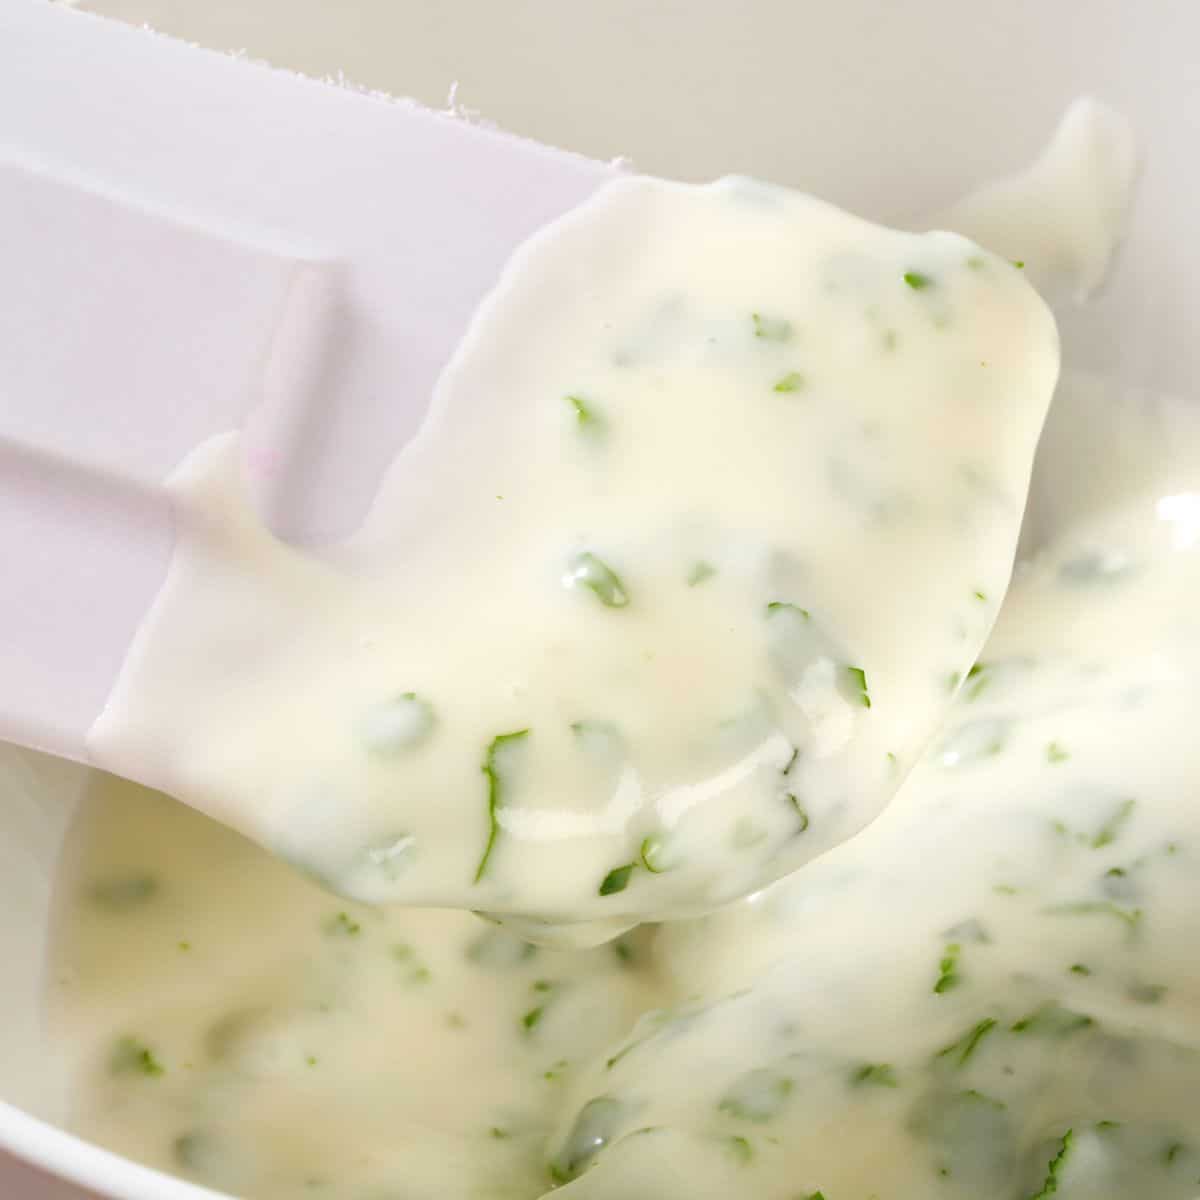 A close up of the ranch dressing on a white rubber spatula.